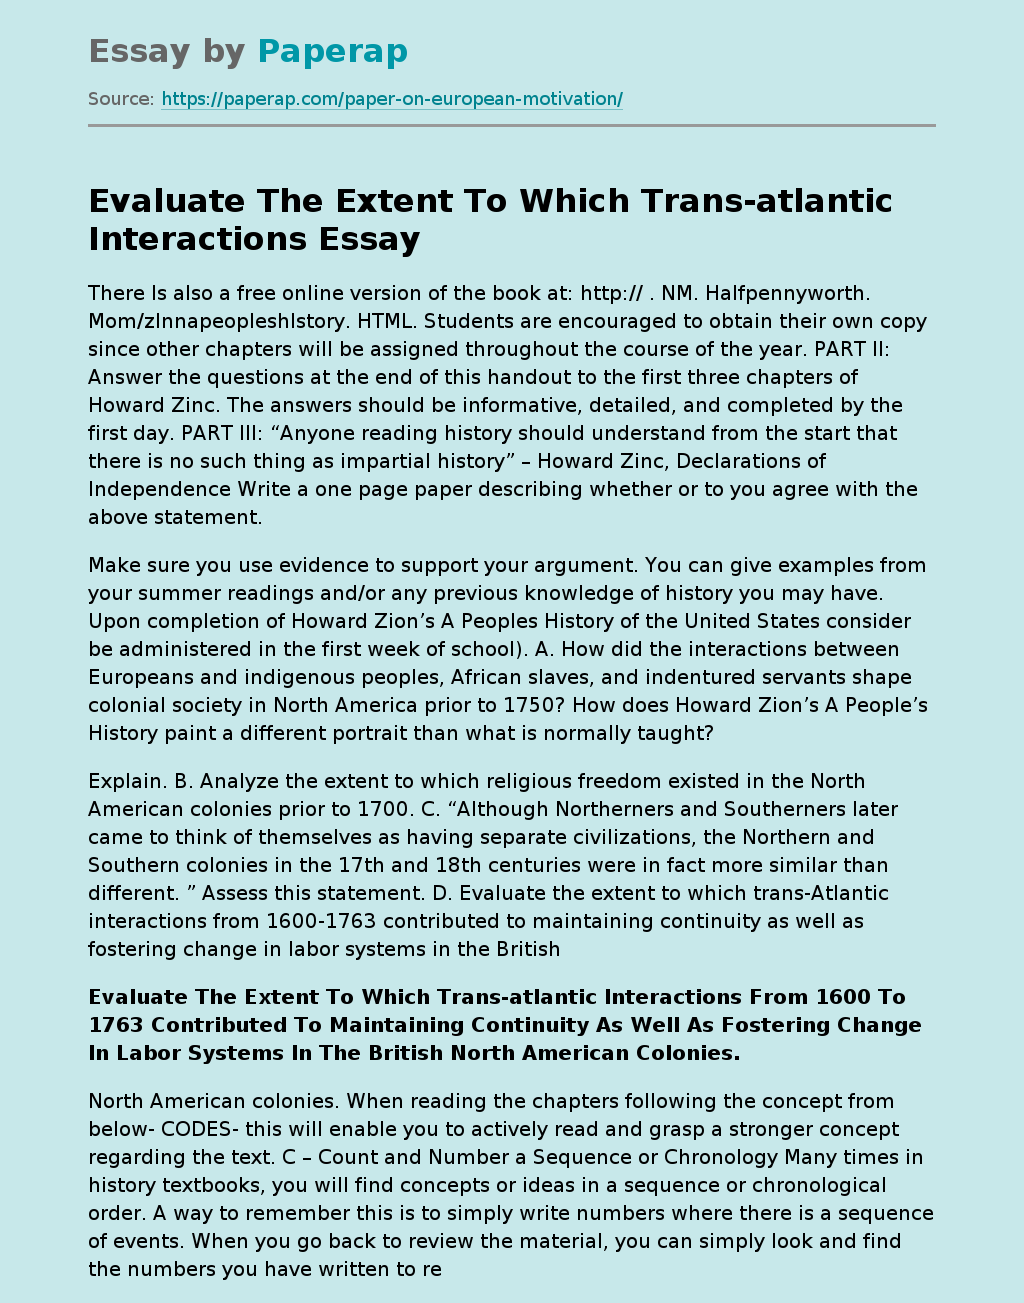 Evaluate The Extent To Which Trans-atlantic Interactions